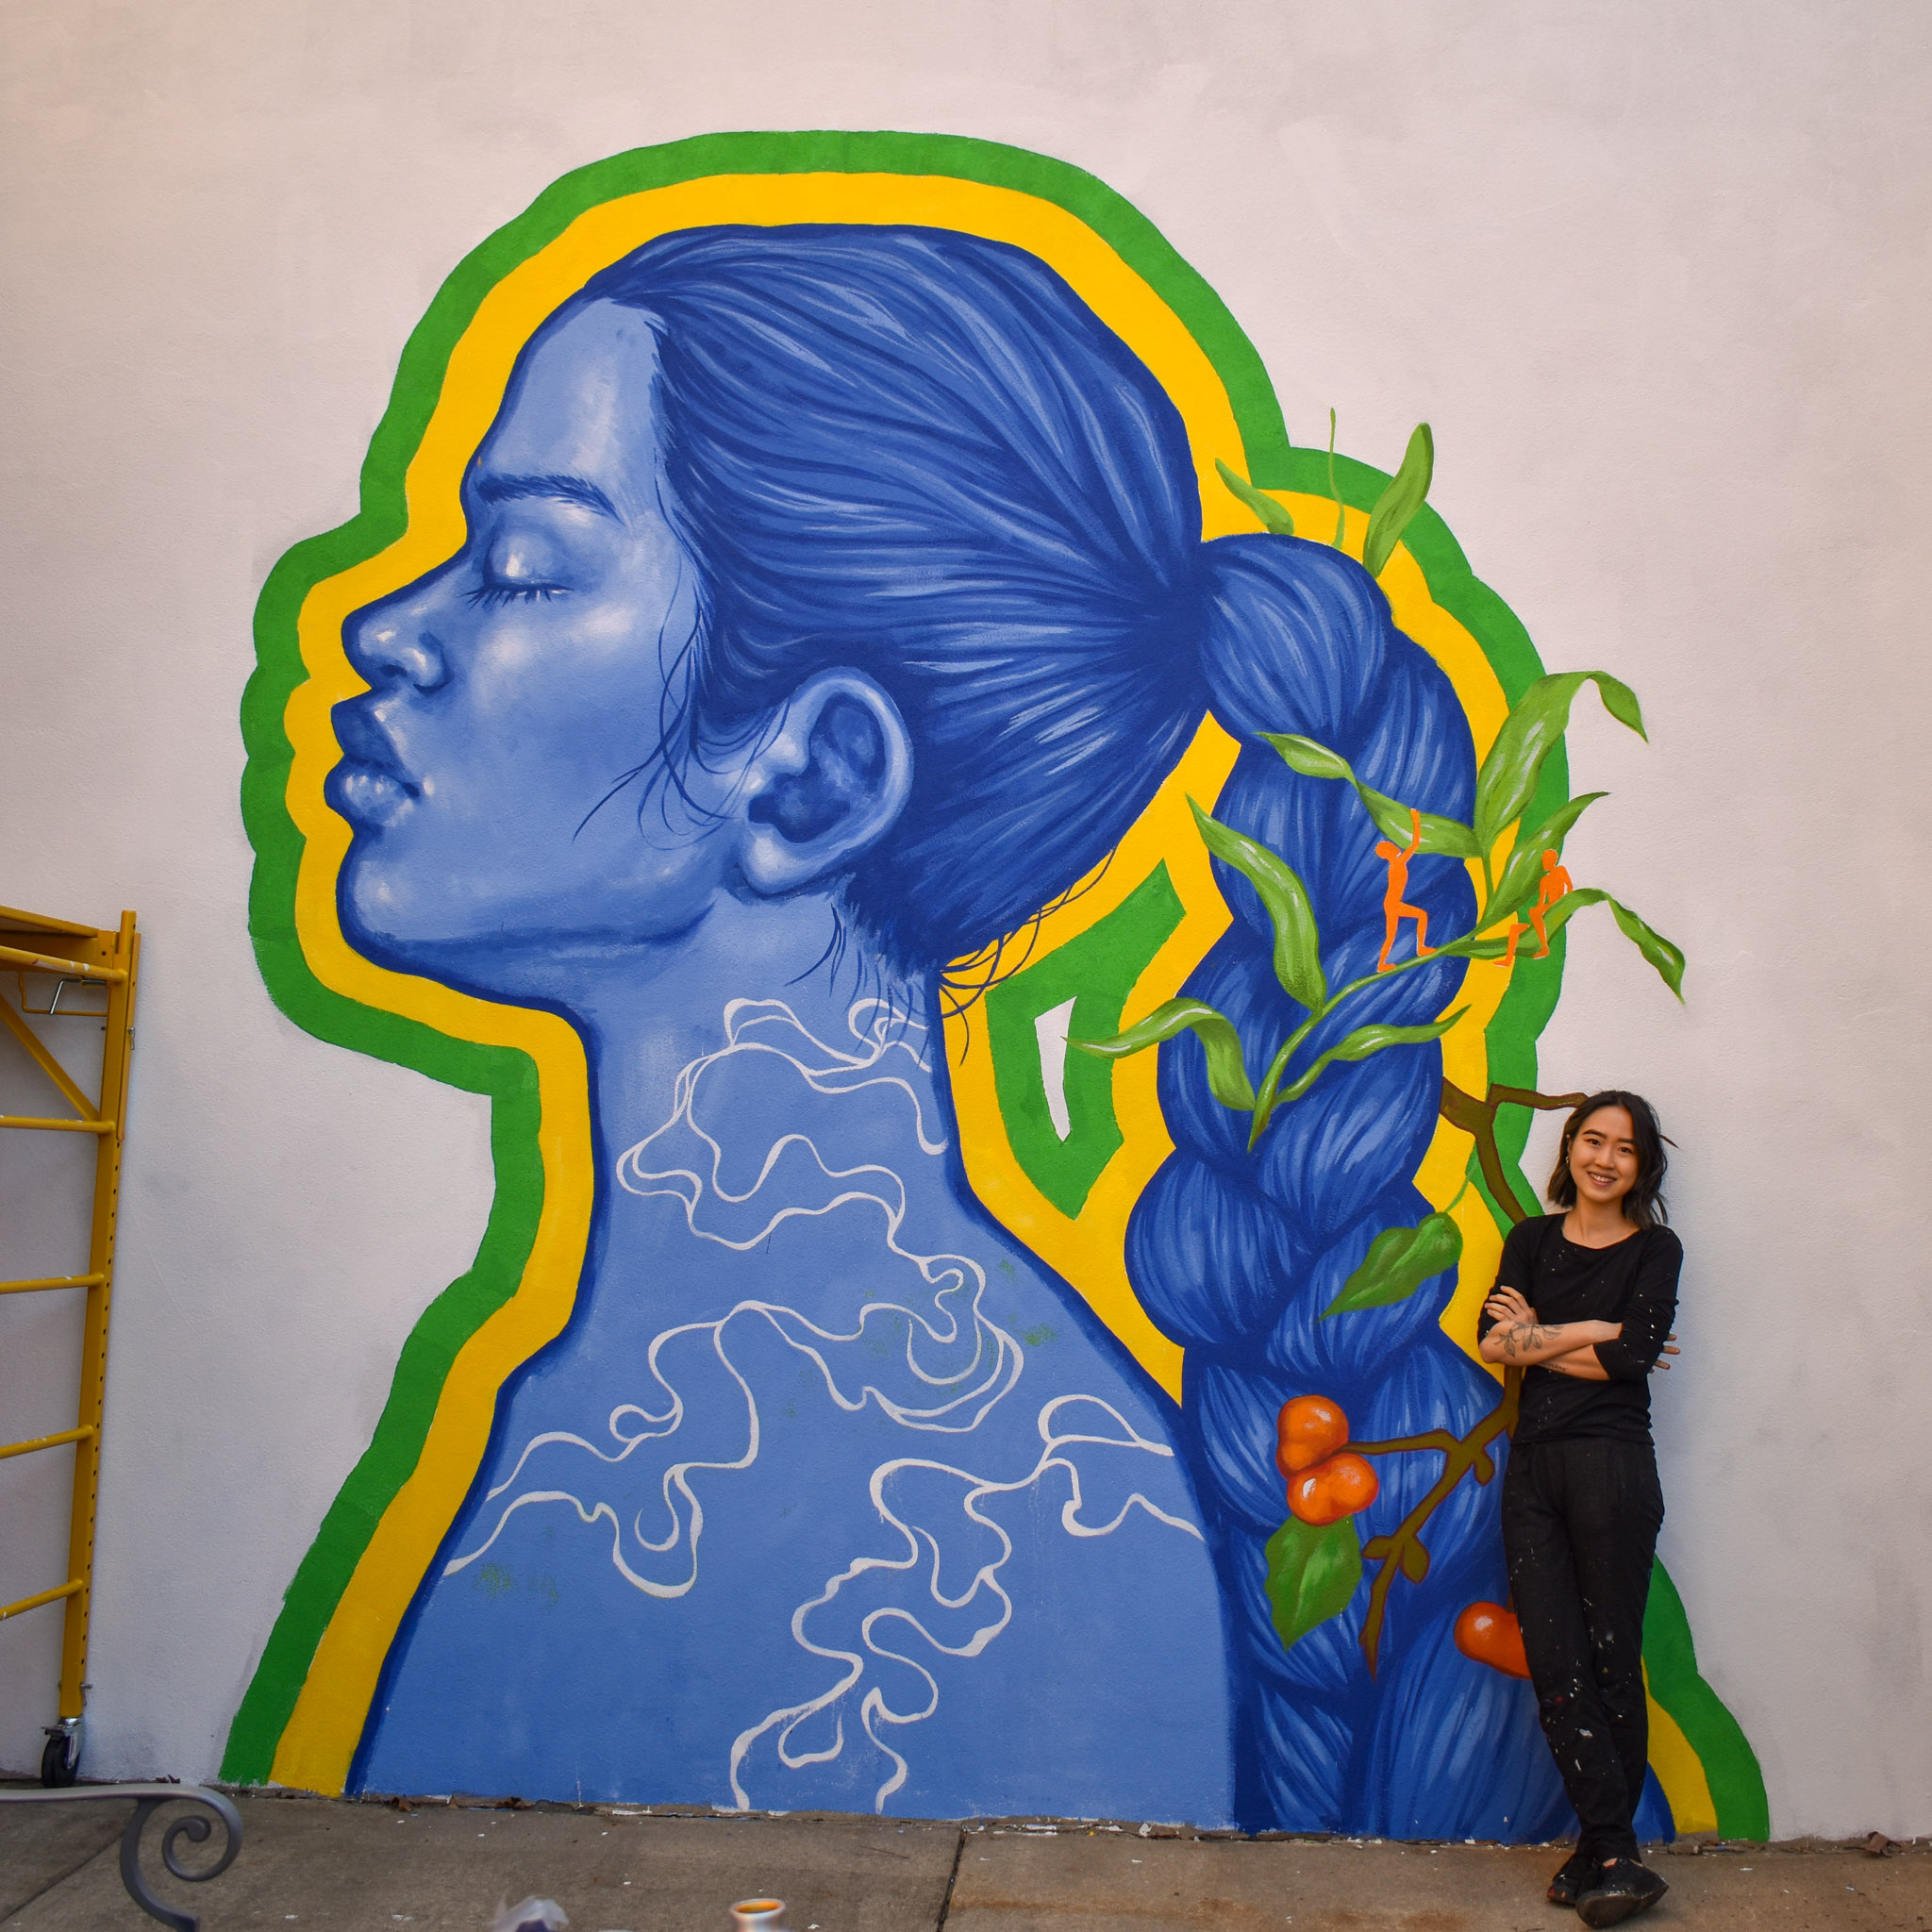 Artist Isabel Lu standing in front of part of the wall mural, depicting a woman standing in profile with a long braid behind her with seeds and grasses woven into her braid and small people climbing the grasses.